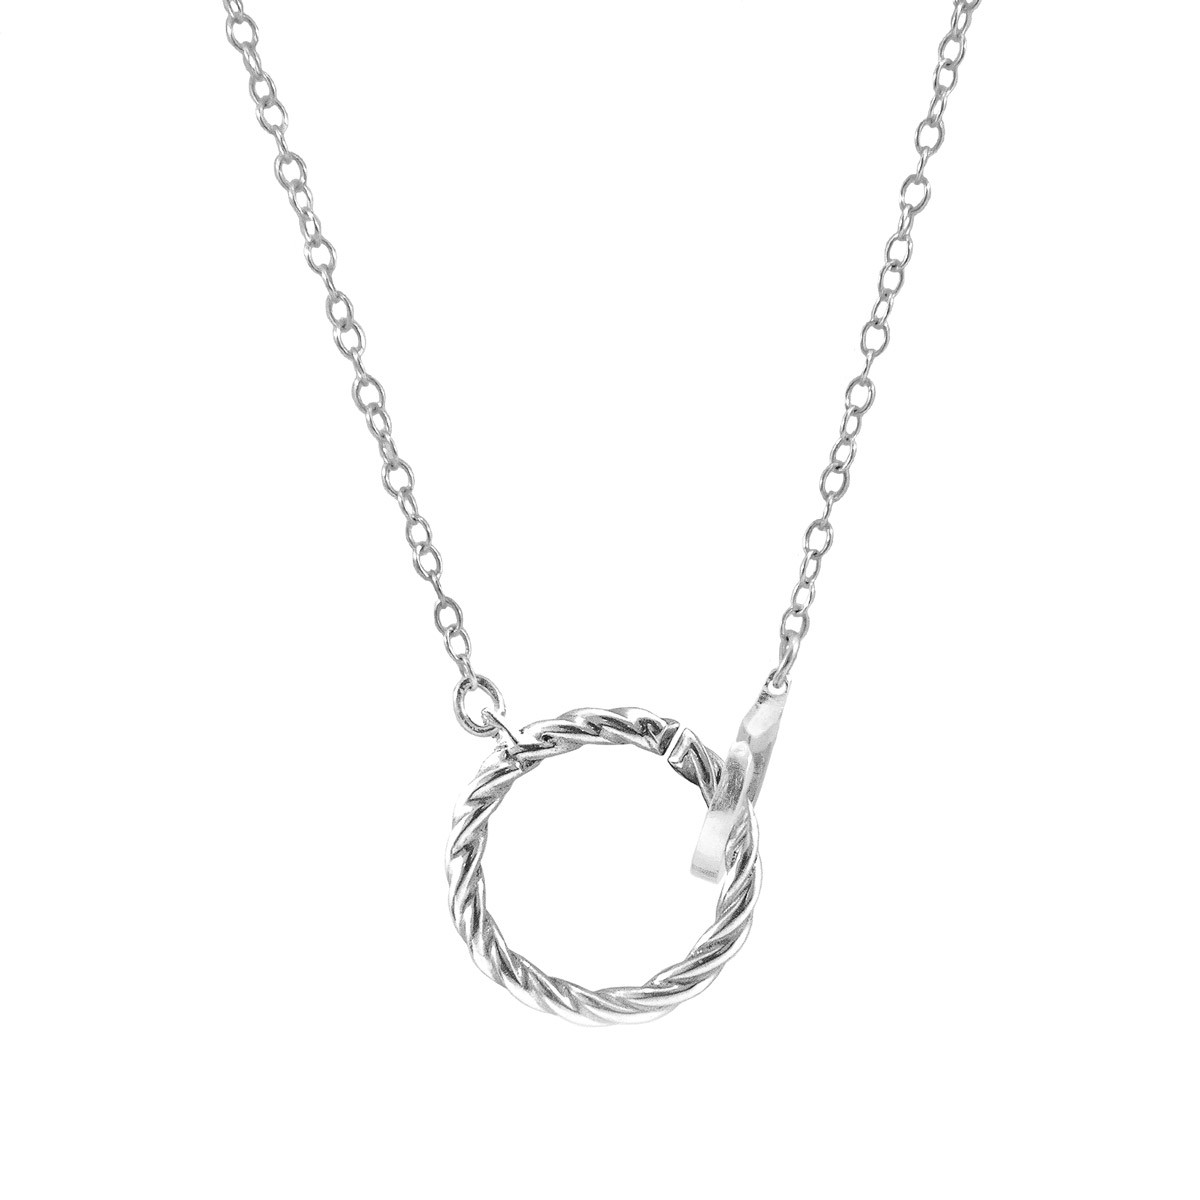 Anchor & Crew Twirled Rope Link Paradise Silver Necklace Pendant